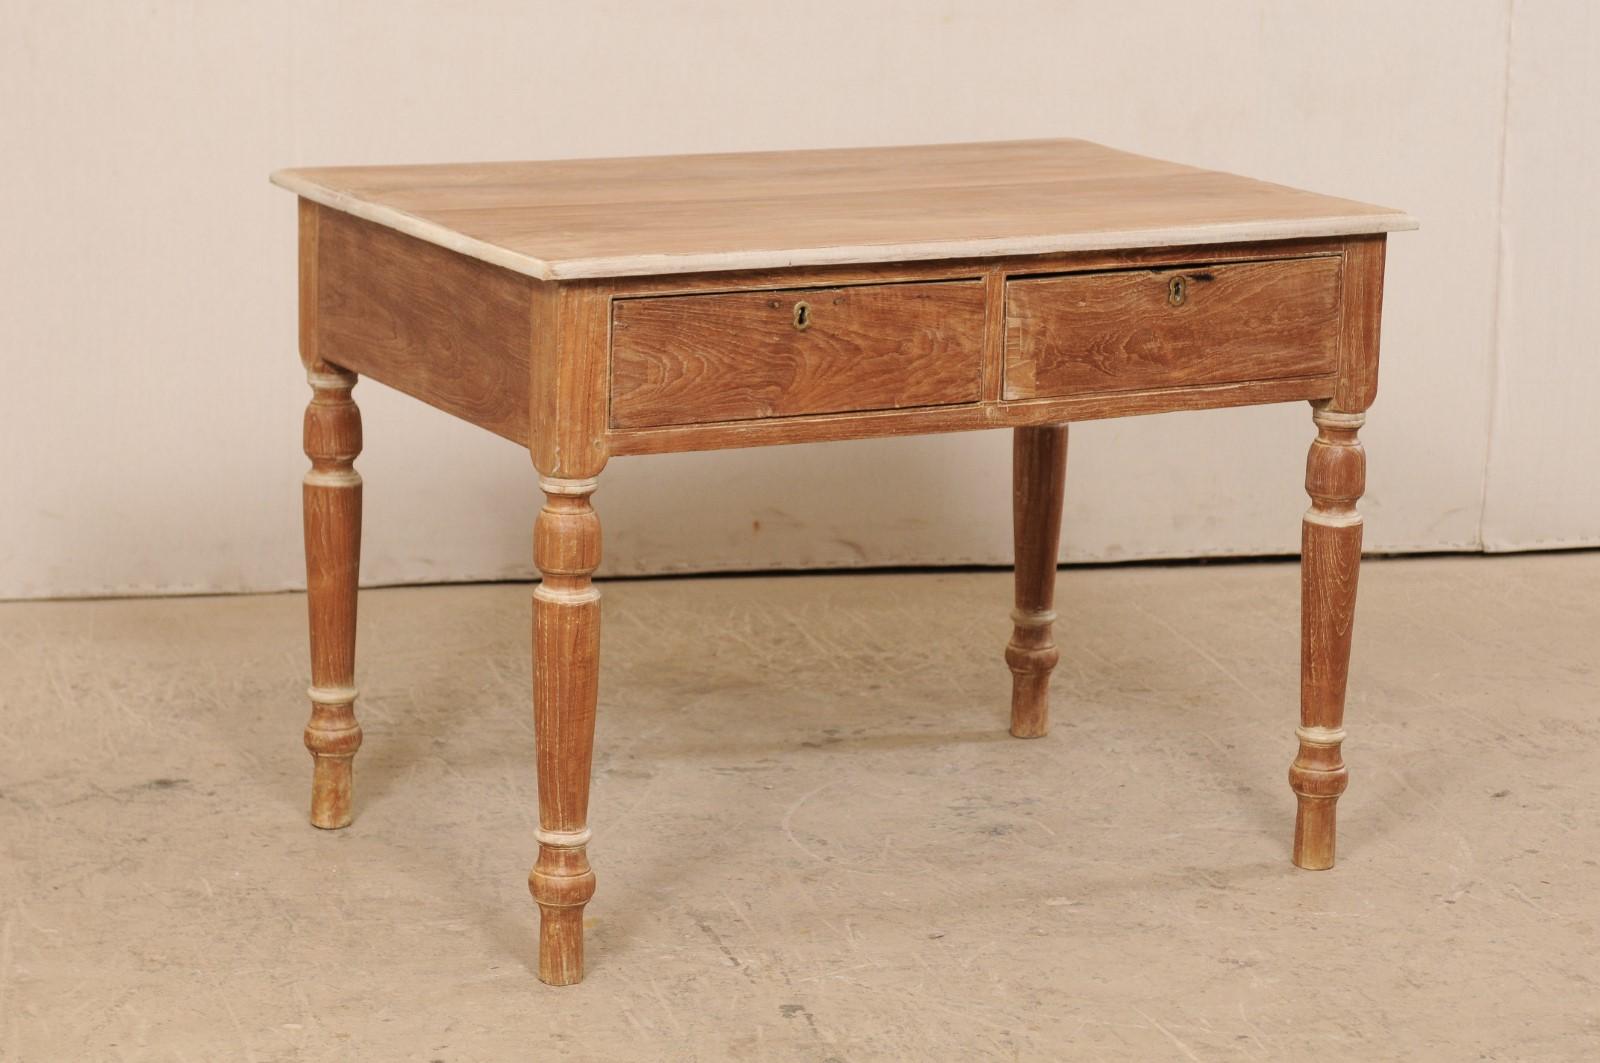 A British Colonial occasional table from the early 20th century. This antique table from India features a slightly overhanging, rectangular-shaped top, resting above a plain skirt which houses two drawers at one long side, and is raised upon four